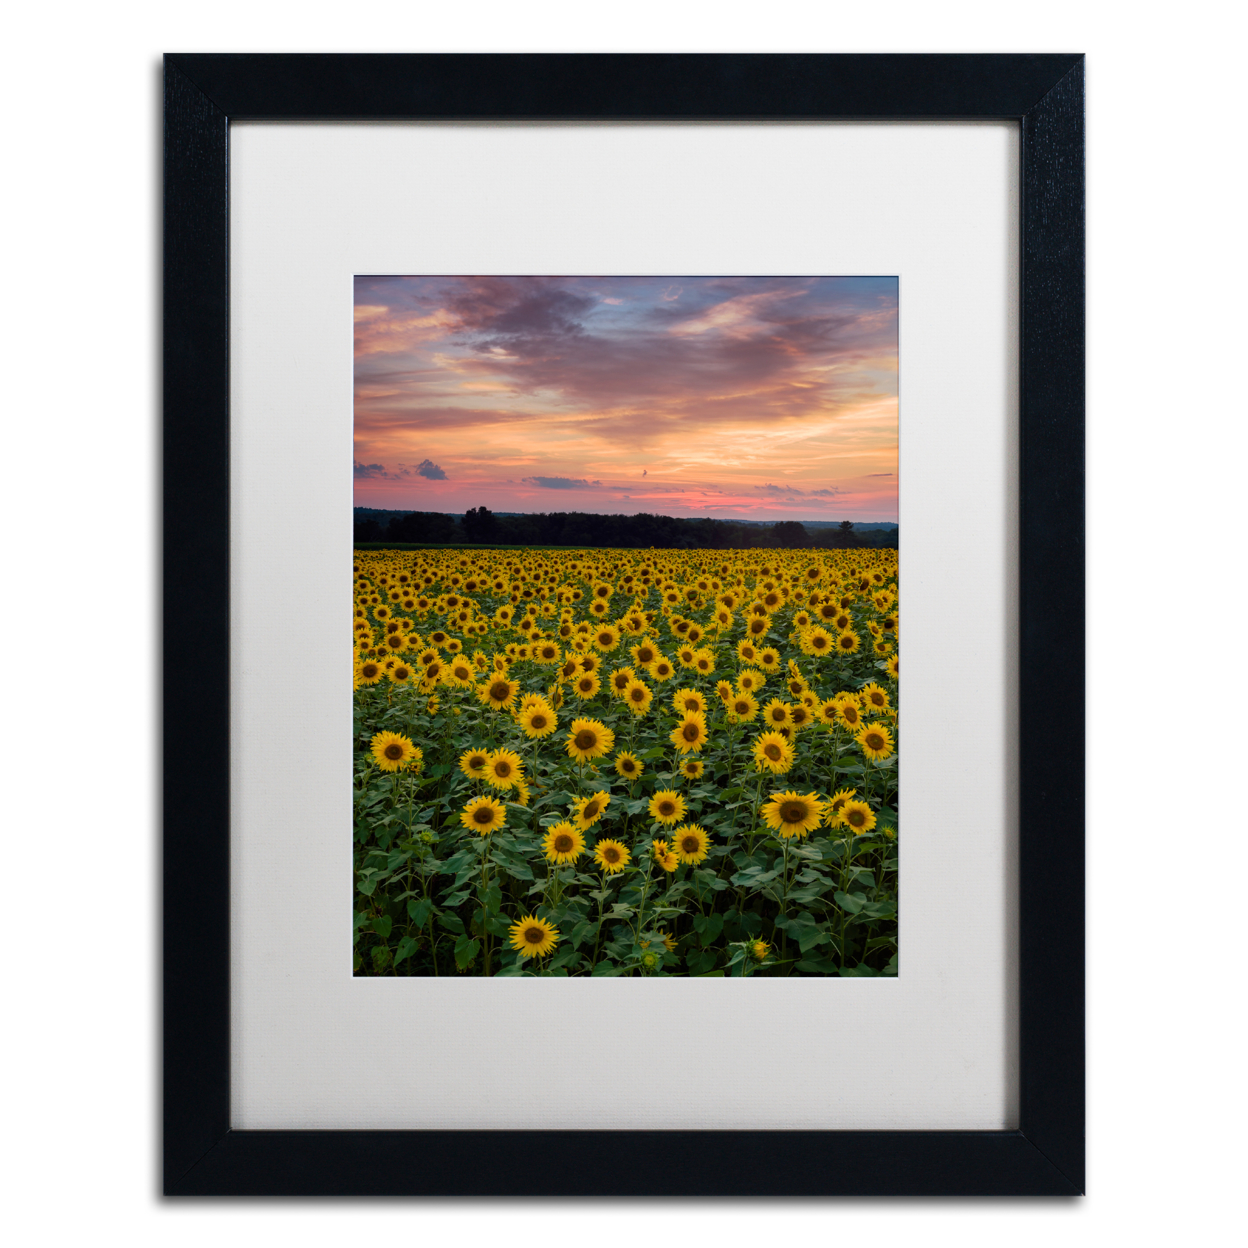 Michael Blanchette Photography 'Sunflowers' Black Wooden Framed Art 18 X 22 Inches